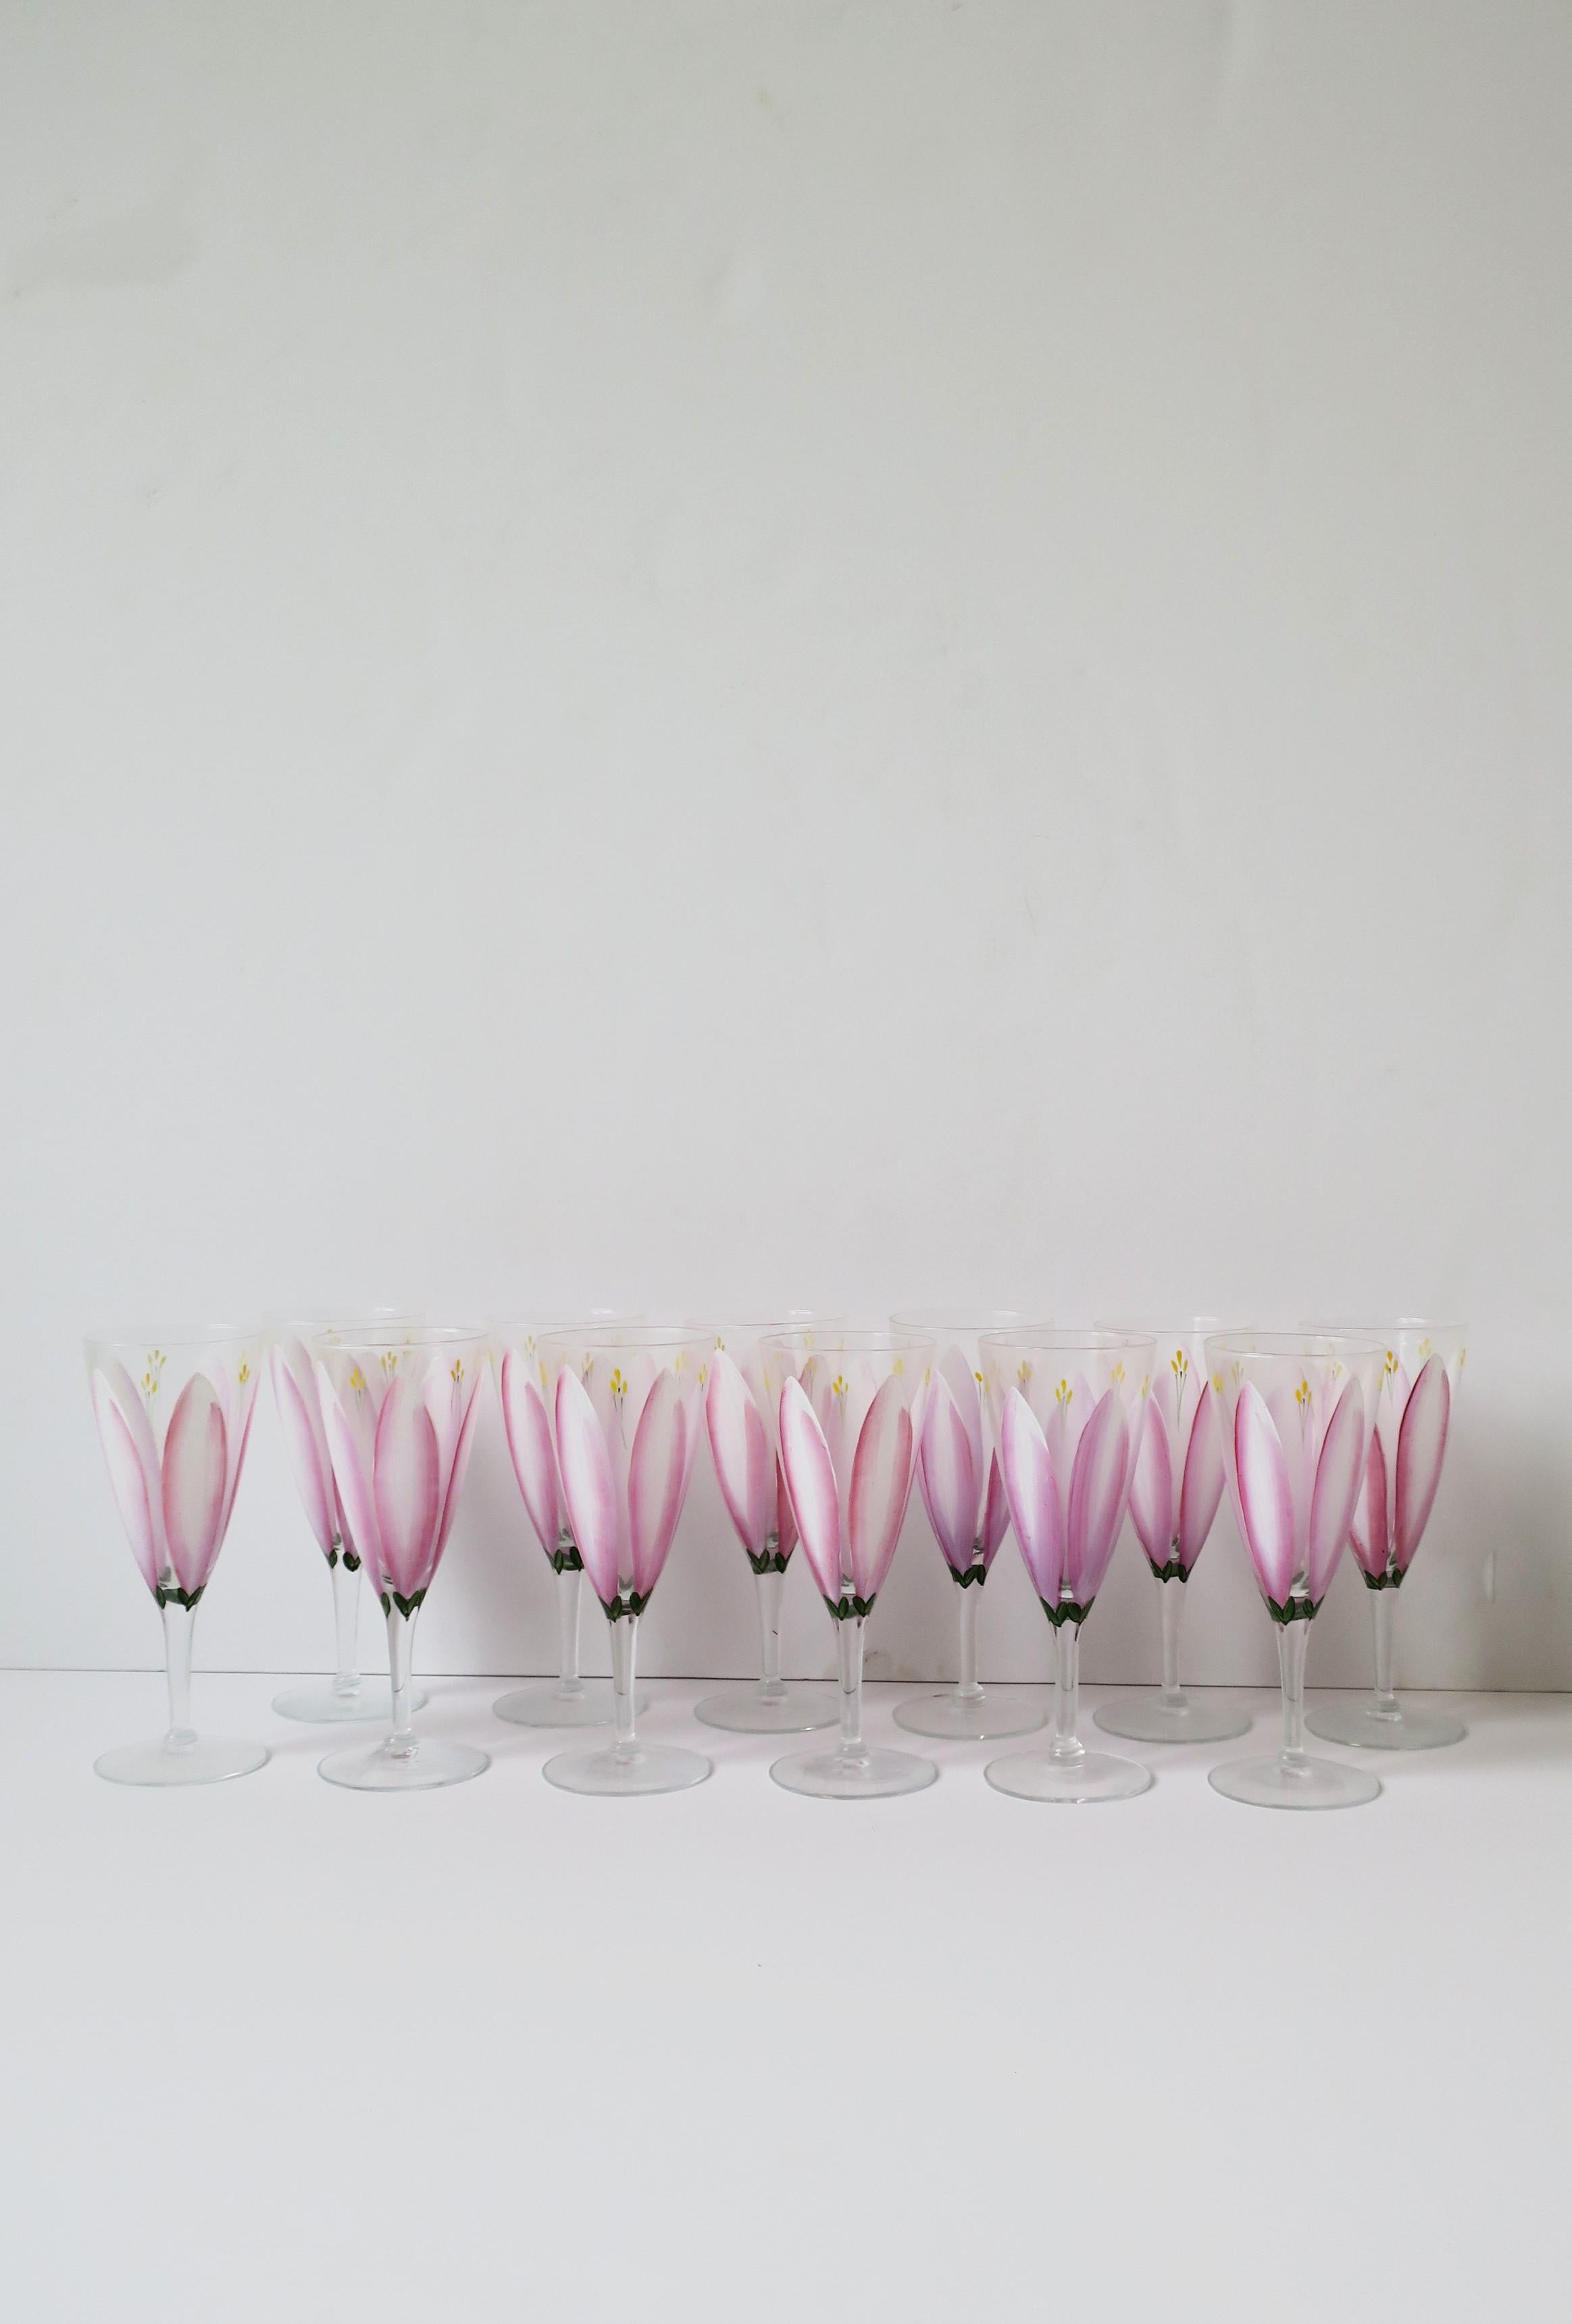 Champagne Flutes Glasses with Pink Tulip Flower Design, Set of 12 In Good Condition For Sale In New York, NY